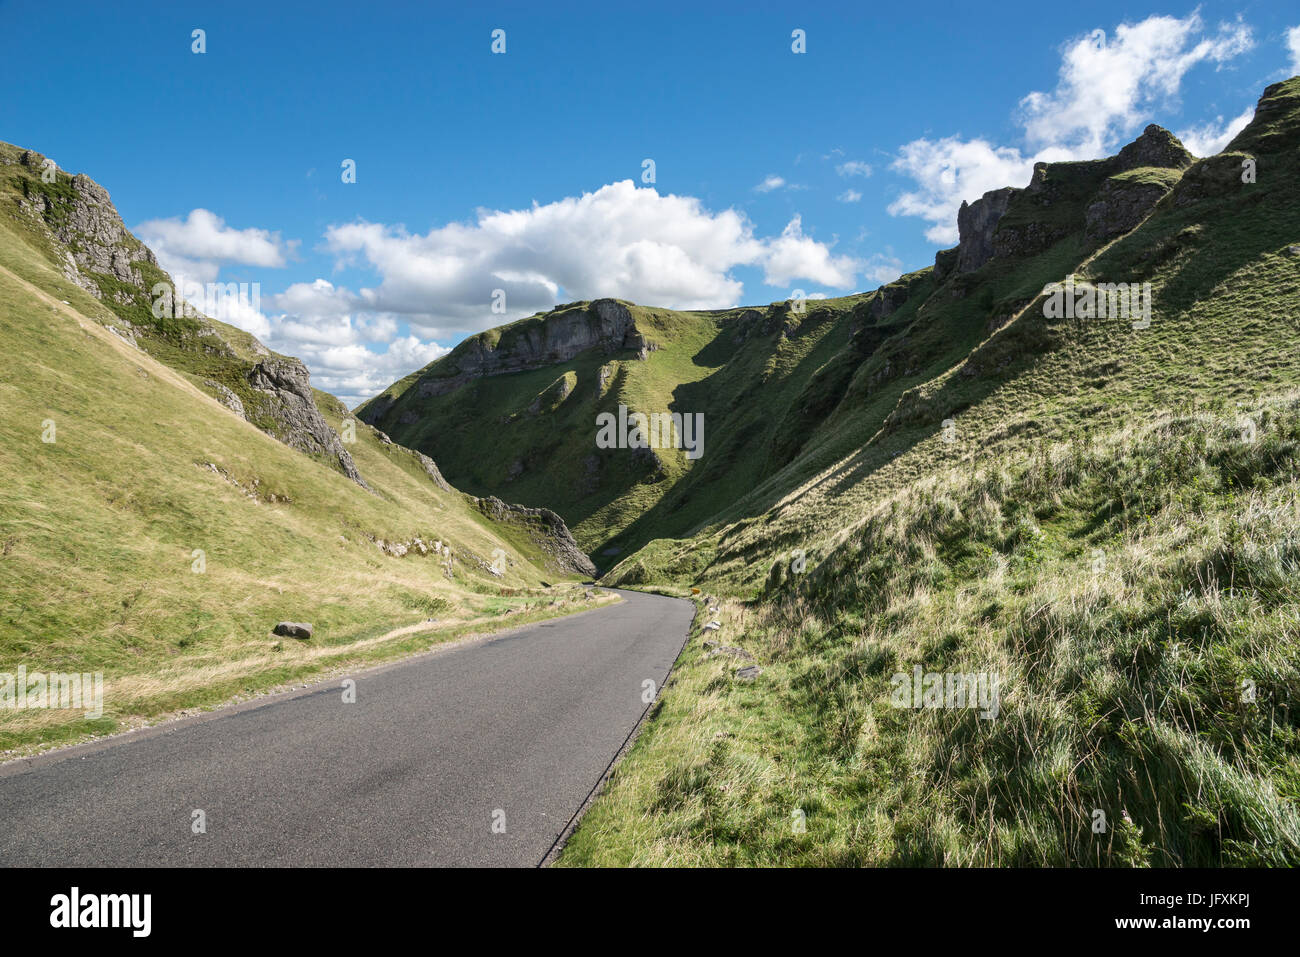 Winnats Pass, an area of dramatic limestone sceenry at Castleton in the Peak District, Derbyshire, England. Stock Photo